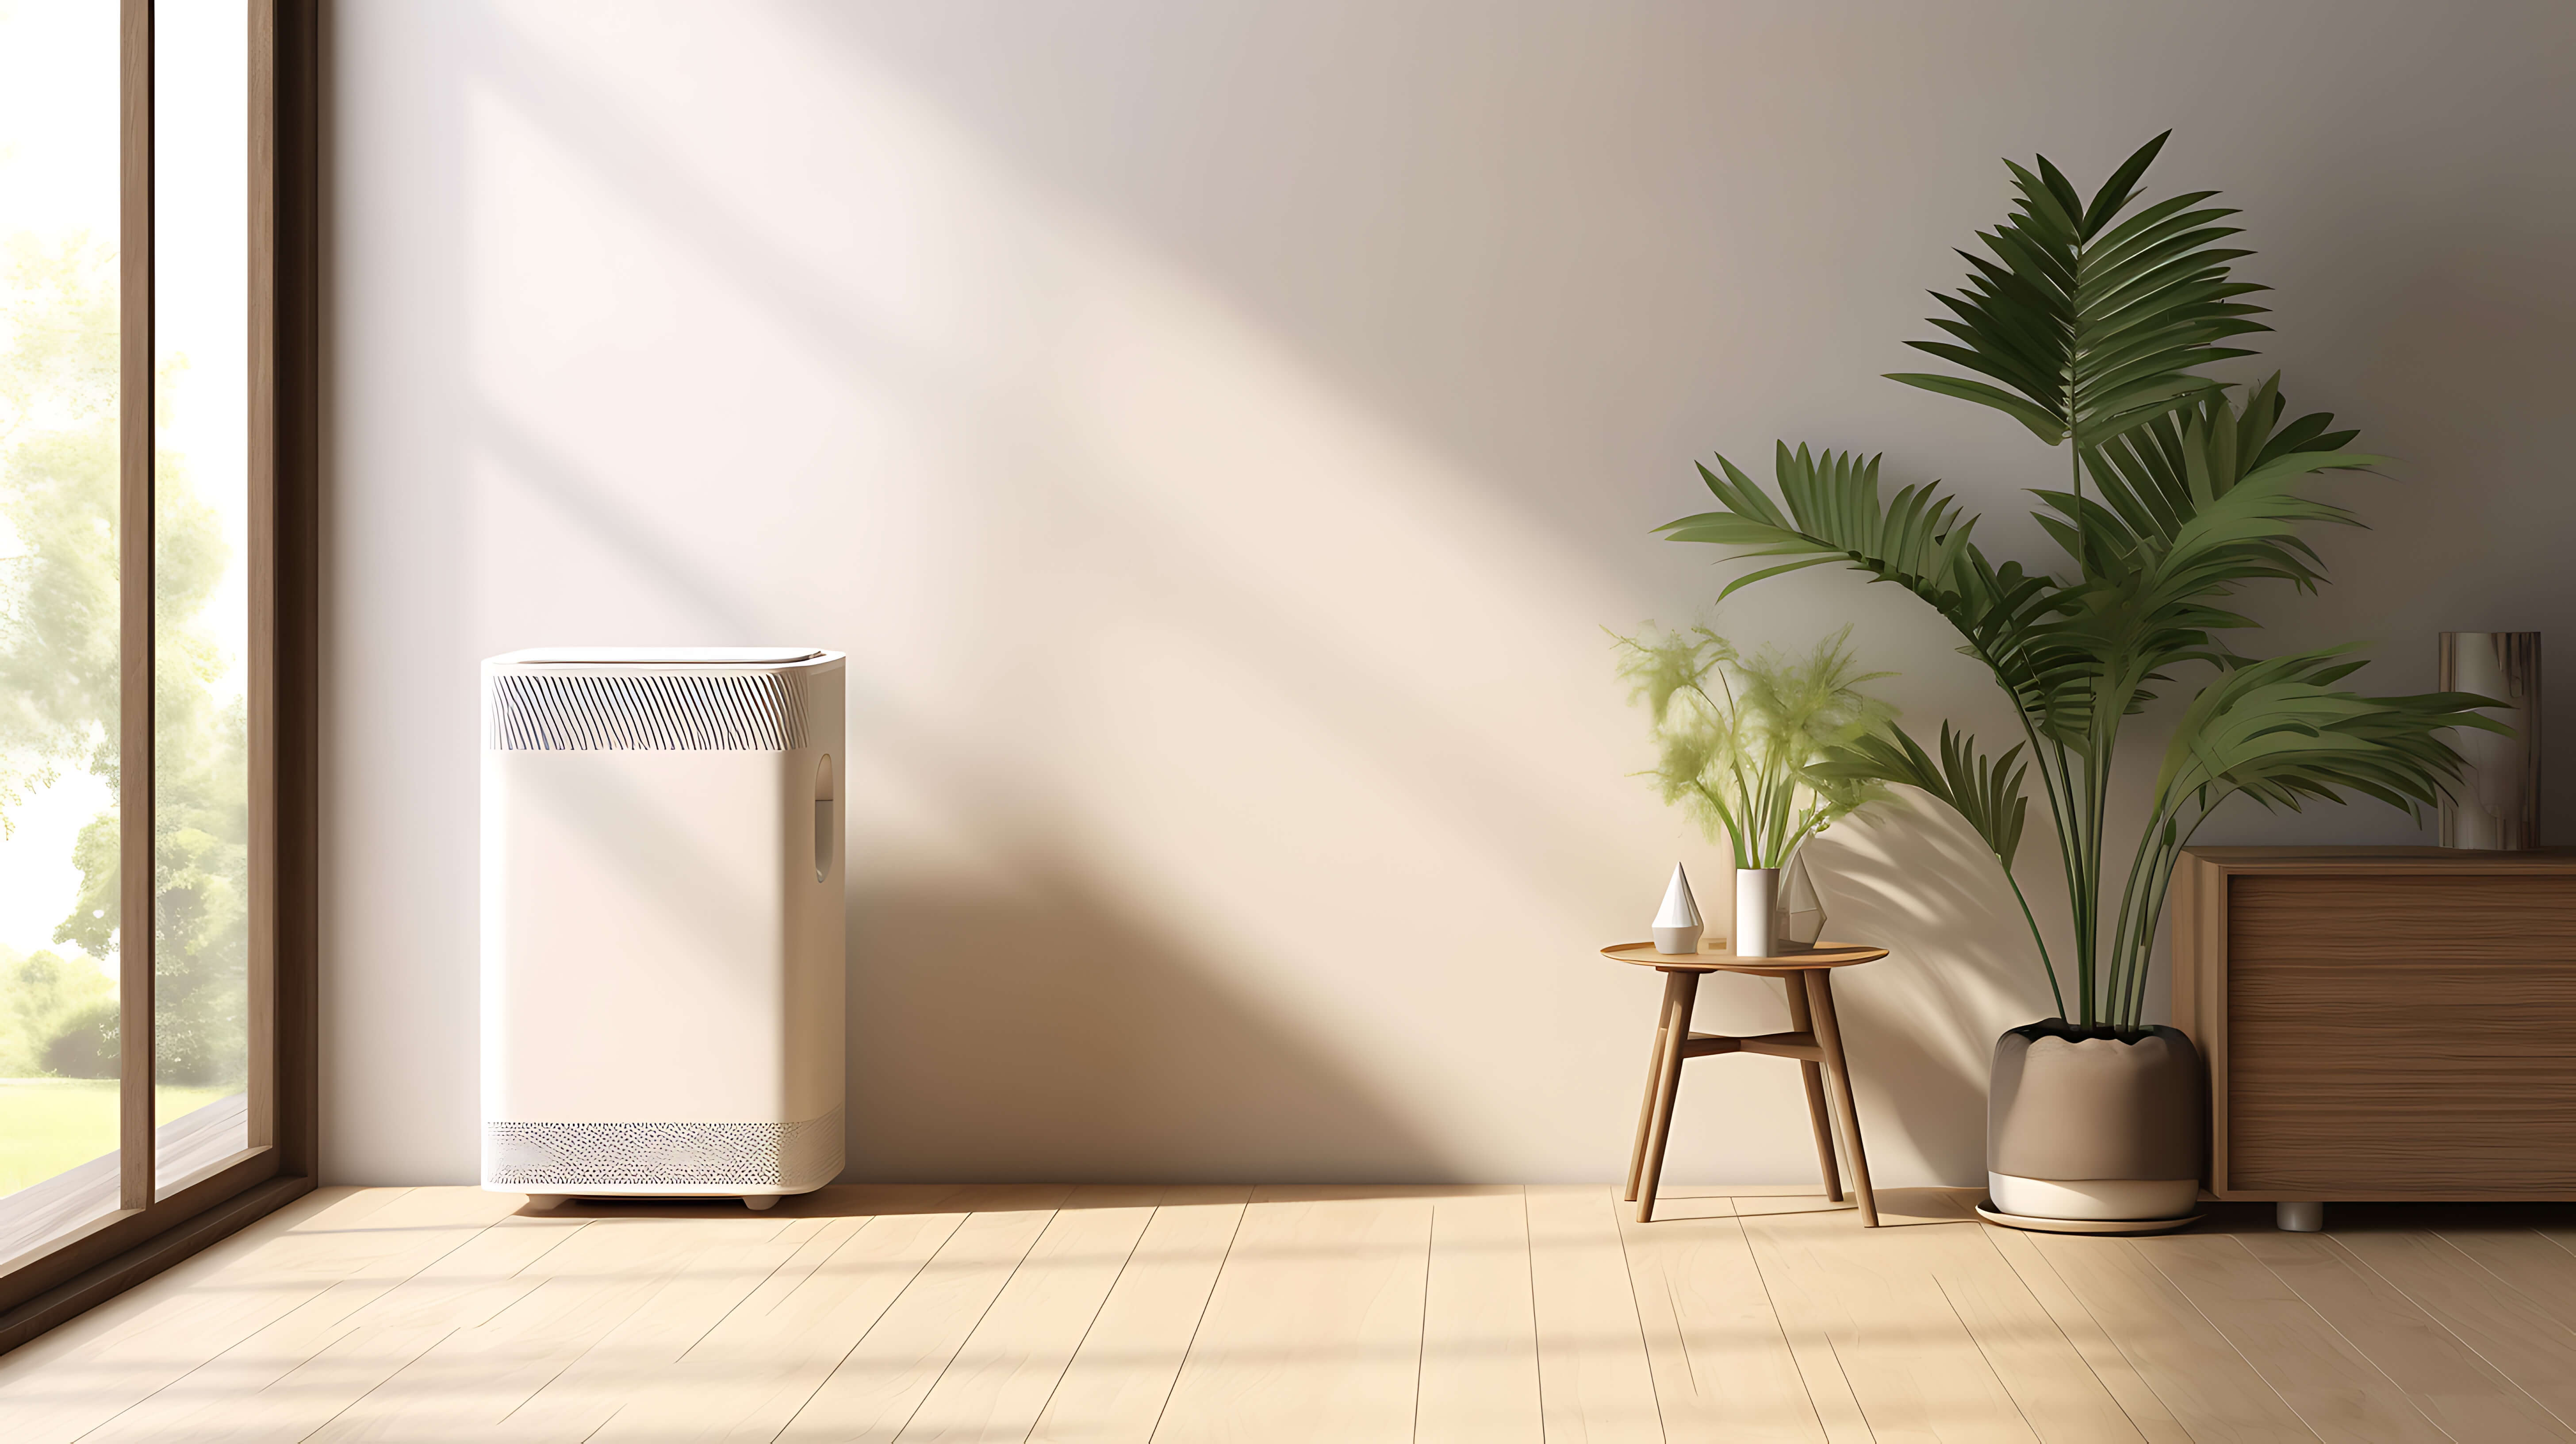 A photograph of a dehumidifier in a modern living room decorated with potted plants and a wooden dresser.